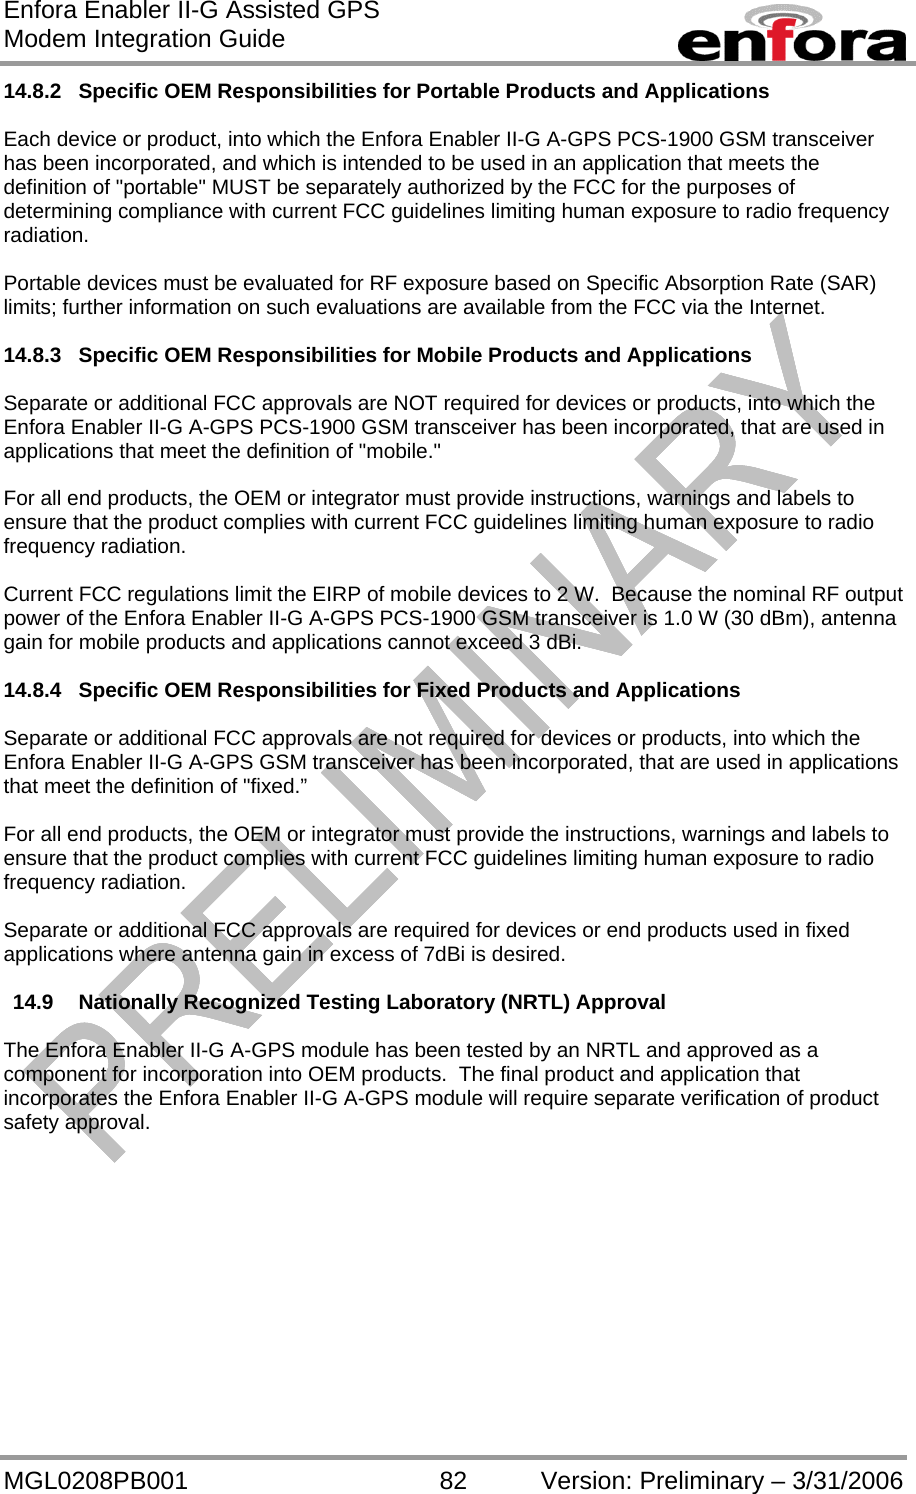 Enfora Enabler II-G Assisted GPS Modem Integration Guide MGL0208PB001 82 Version: Preliminary – 3/31/2006 14.8.2  Specific OEM Responsibilities for Portable Products and Applications  Each device or product, into which the Enfora Enabler II-G A-GPS PCS-1900 GSM transceiver has been incorporated, and which is intended to be used in an application that meets the definition of &quot;portable&quot; MUST be separately authorized by the FCC for the purposes of determining compliance with current FCC guidelines limiting human exposure to radio frequency radiation.  Portable devices must be evaluated for RF exposure based on Specific Absorption Rate (SAR) limits; further information on such evaluations are available from the FCC via the Internet.  14.8.3  Specific OEM Responsibilities for Mobile Products and Applications  Separate or additional FCC approvals are NOT required for devices or products, into which the Enfora Enabler II-G A-GPS PCS-1900 GSM transceiver has been incorporated, that are used in applications that meet the definition of &quot;mobile.&quot;  For all end products, the OEM or integrator must provide instructions, warnings and labels to ensure that the product complies with current FCC guidelines limiting human exposure to radio frequency radiation.  Current FCC regulations limit the EIRP of mobile devices to 2 W.  Because the nominal RF output power of the Enfora Enabler II-G A-GPS PCS-1900 GSM transceiver is 1.0 W (30 dBm), antenna gain for mobile products and applications cannot exceed 3 dBi.  14.8.4  Specific OEM Responsibilities for Fixed Products and Applications  Separate or additional FCC approvals are not required for devices or products, into which the Enfora Enabler II-G A-GPS GSM transceiver has been incorporated, that are used in applications that meet the definition of &quot;fixed.”  For all end products, the OEM or integrator must provide the instructions, warnings and labels to ensure that the product complies with current FCC guidelines limiting human exposure to radio frequency radiation.  Separate or additional FCC approvals are required for devices or end products used in fixed applications where antenna gain in excess of 7dBi is desired.  14.9  Nationally Recognized Testing Laboratory (NRTL) Approval  The Enfora Enabler II-G A-GPS module has been tested by an NRTL and approved as a component for incorporation into OEM products.  The final product and application that incorporates the Enfora Enabler II-G A-GPS module will require separate verification of product safety approval. 